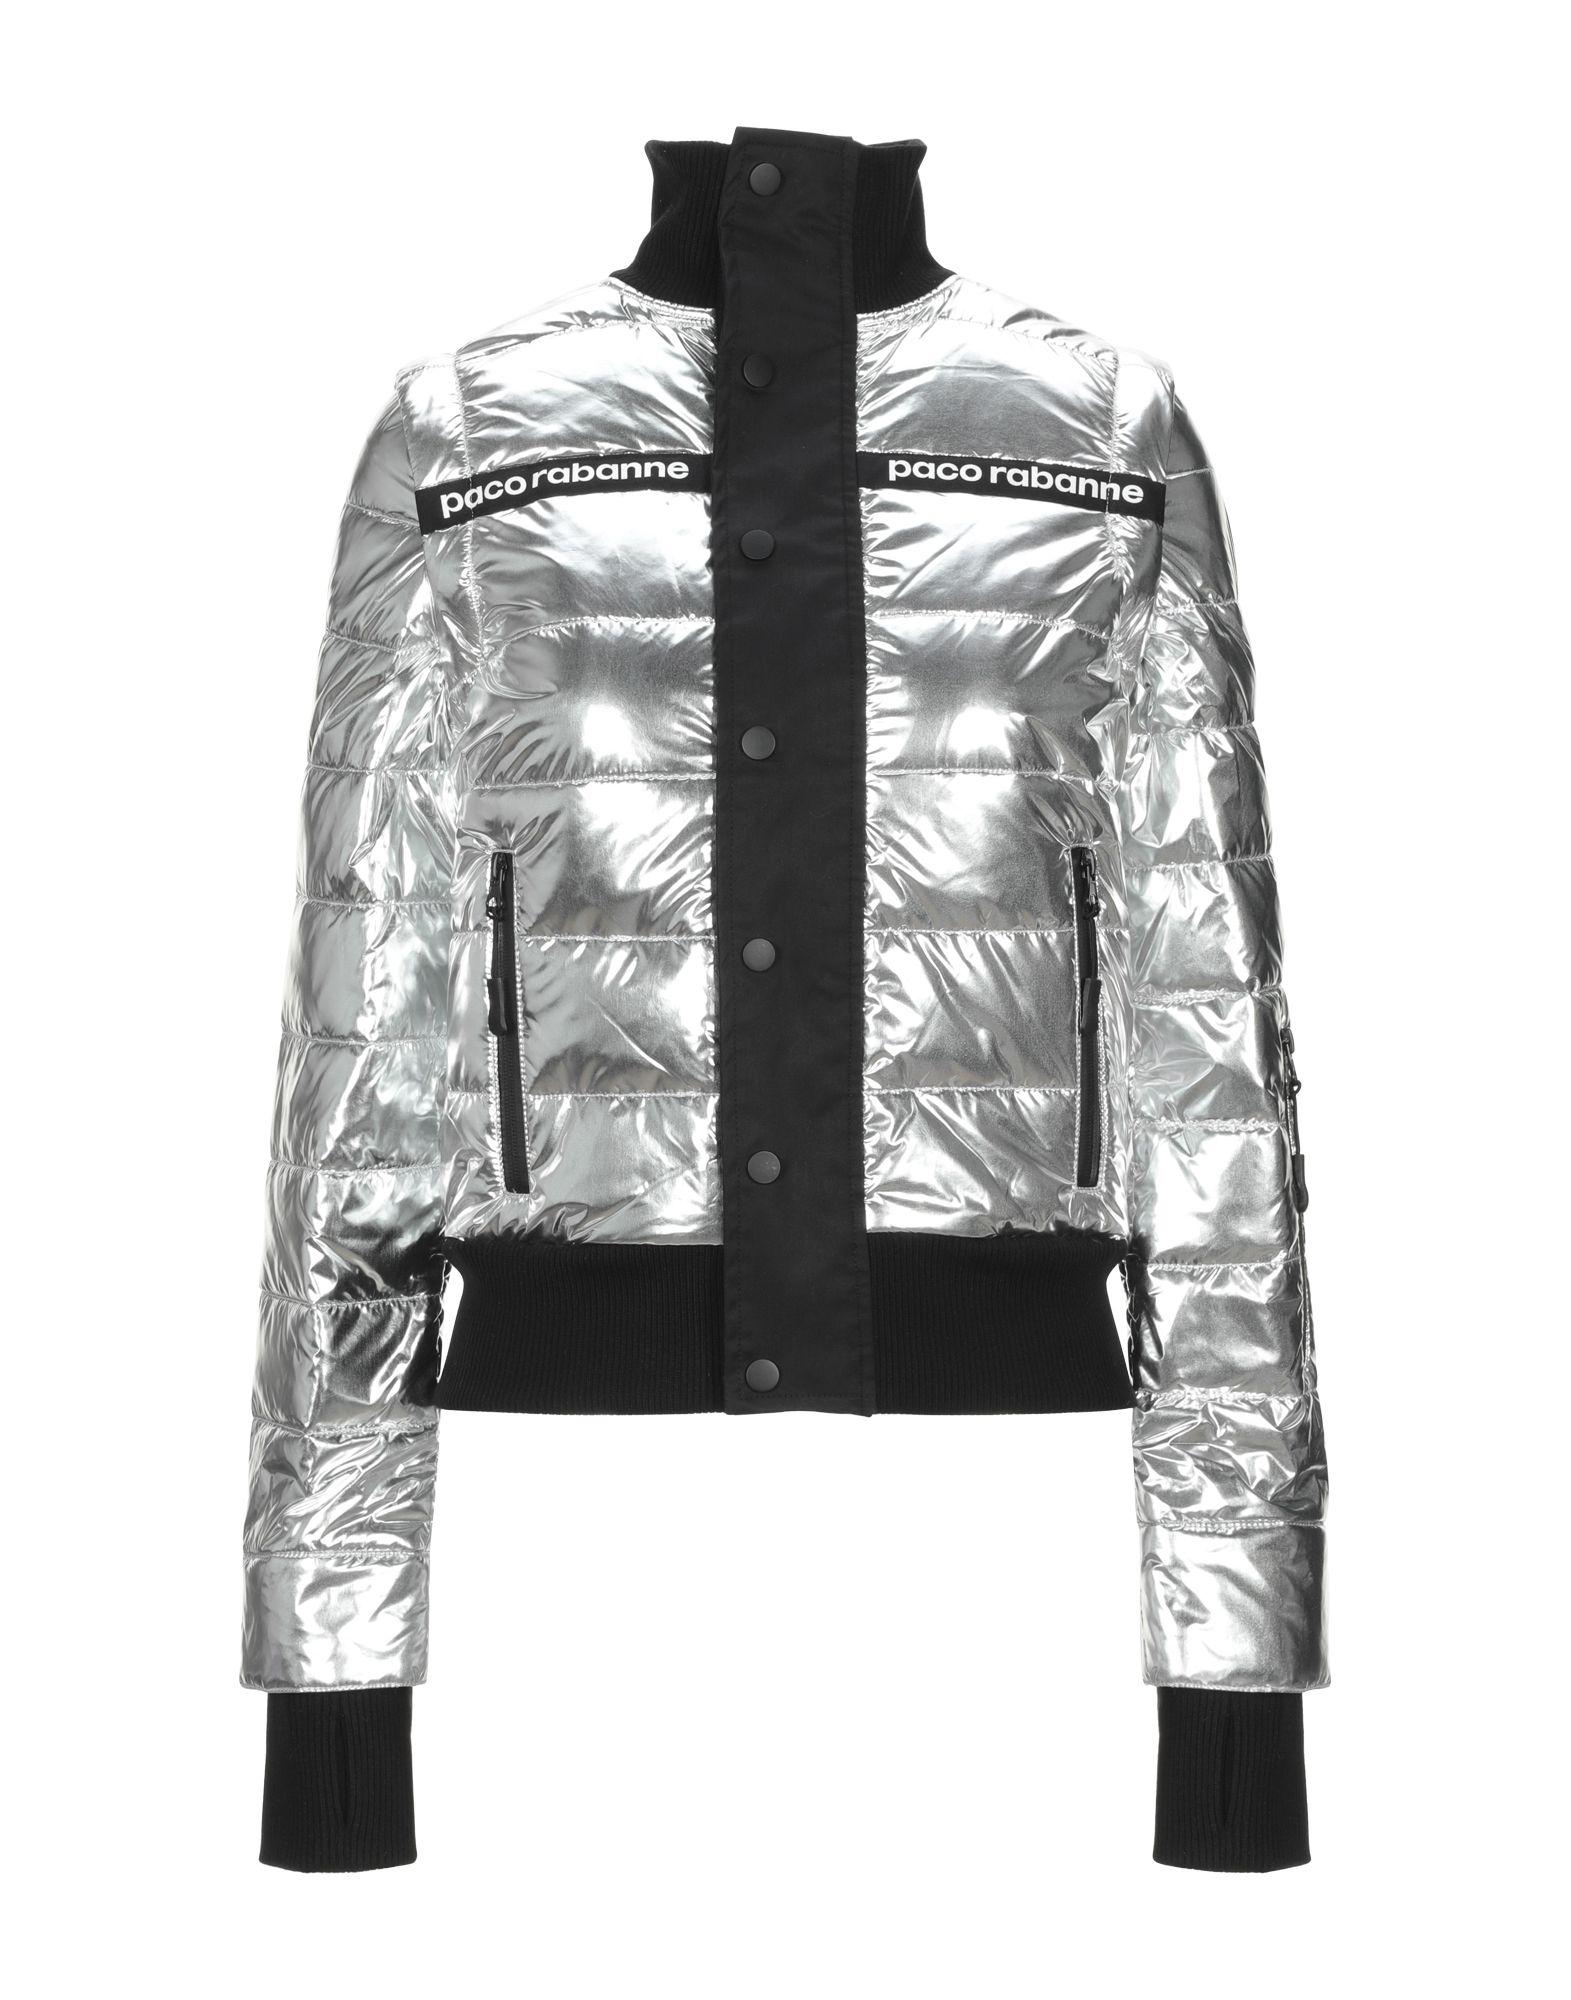 Paco Rabanne Synthetic Jacket in Silver (Metallic) - Lyst